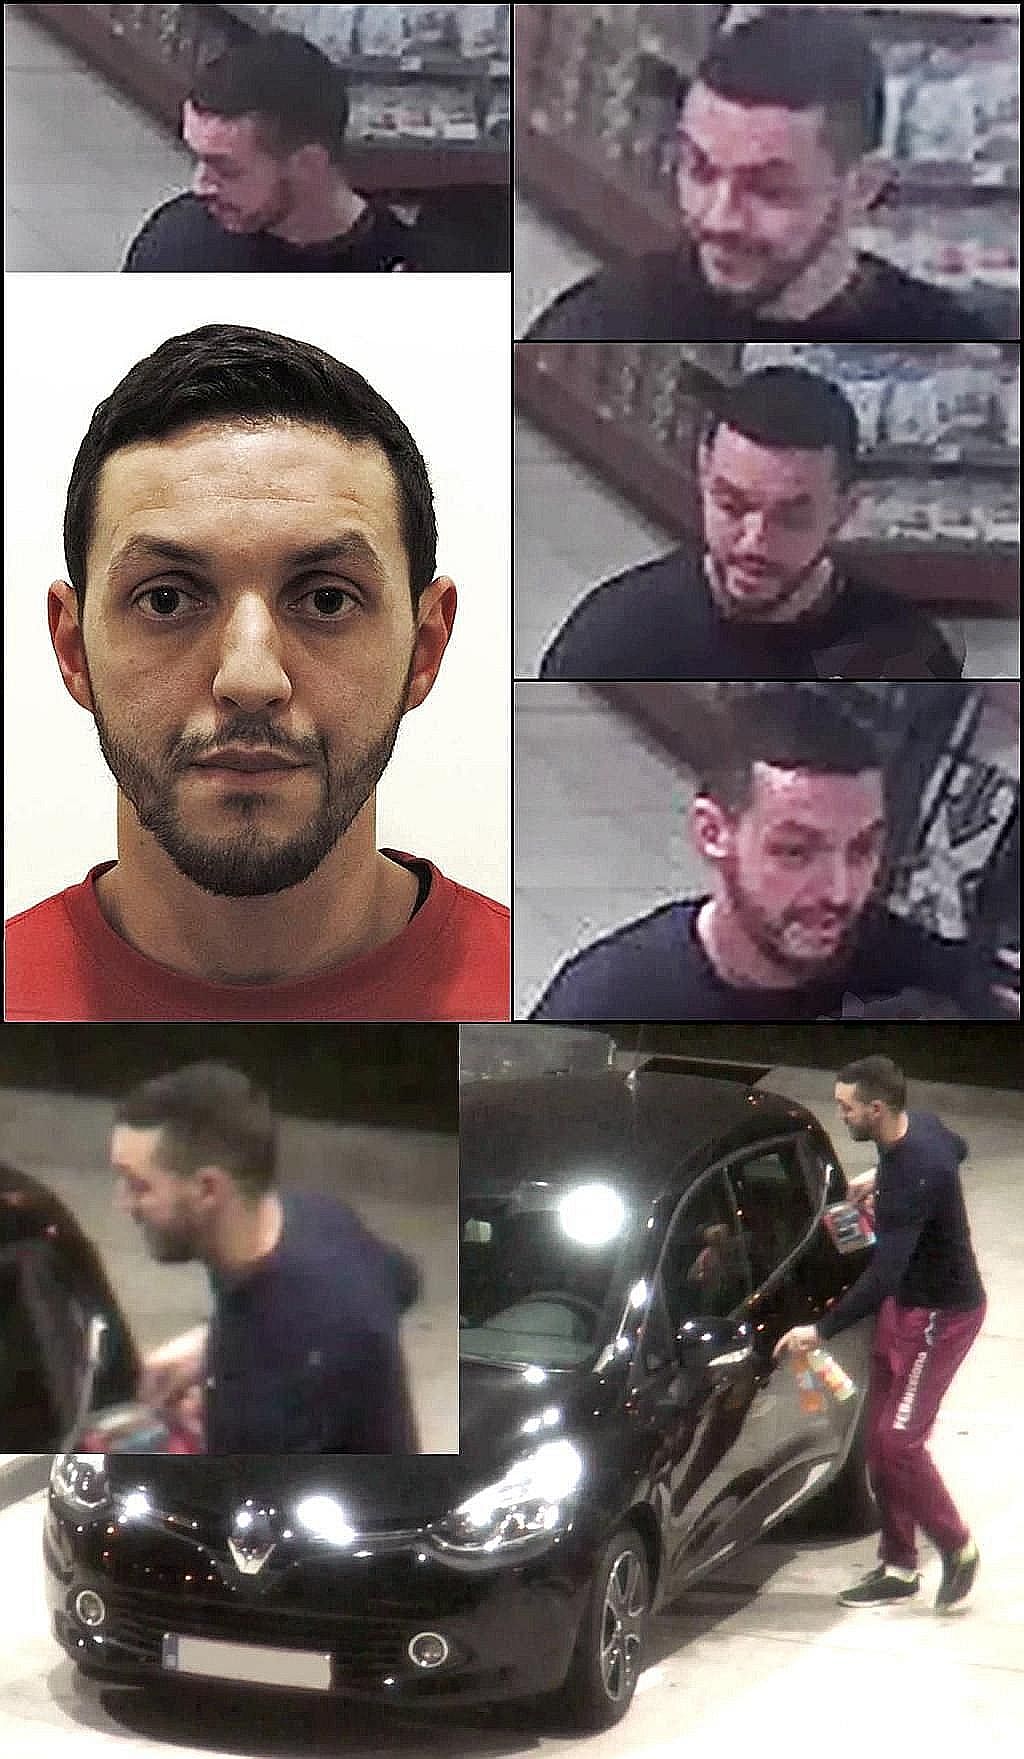 Belgium's state prosecutor has issued an international arrest warrant for Mohamed Abrini (left, in CCTV images), who was seen with Salah Abdeslam, suspected to be the eighth attacker mentioned by ISIS when it claimed responsibility for the Paris atta